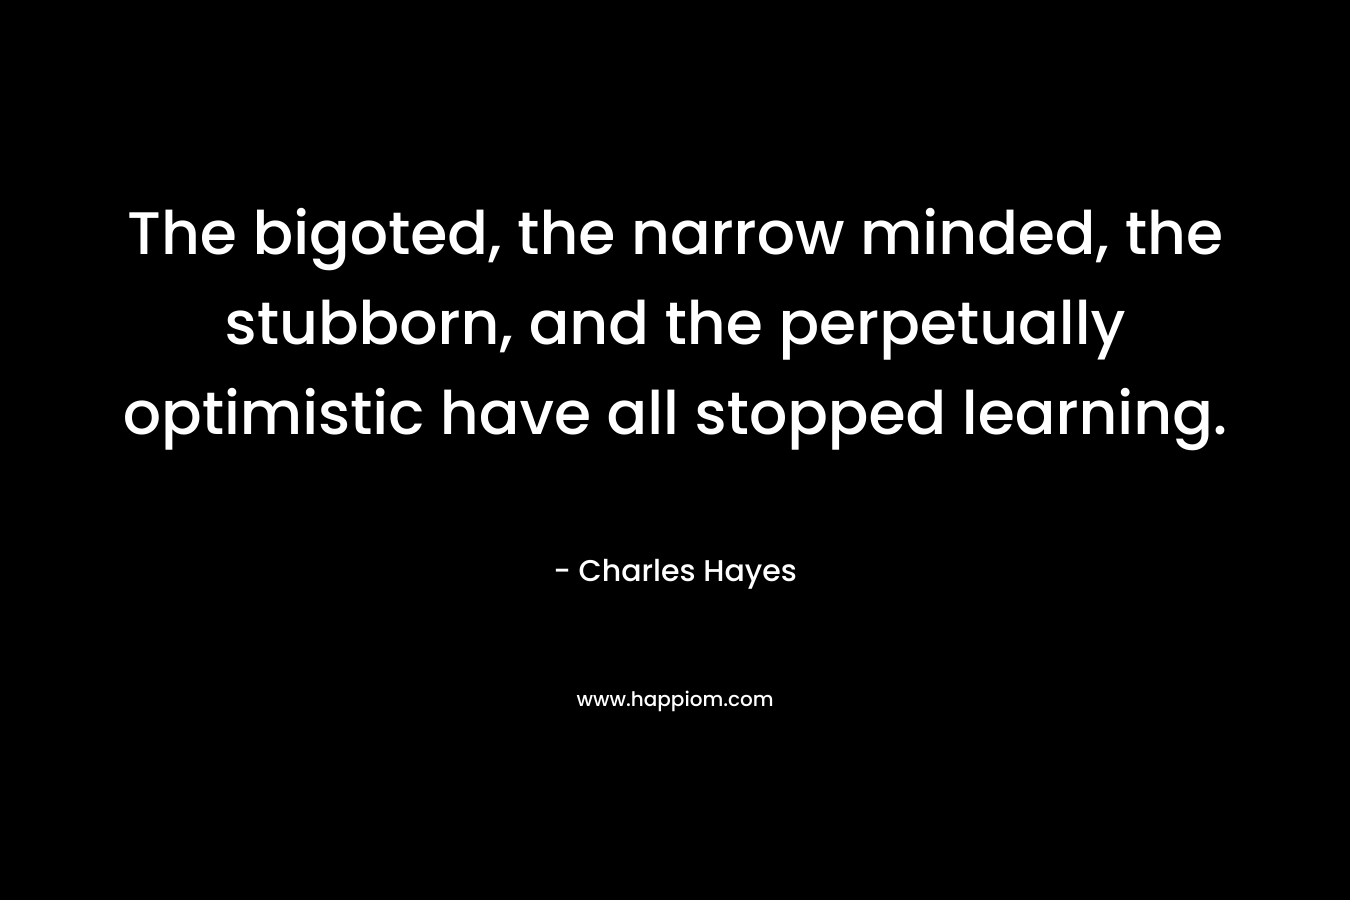 The bigoted, the narrow minded, the stubborn, and the perpetually optimistic have all stopped learning. – Charles Hayes